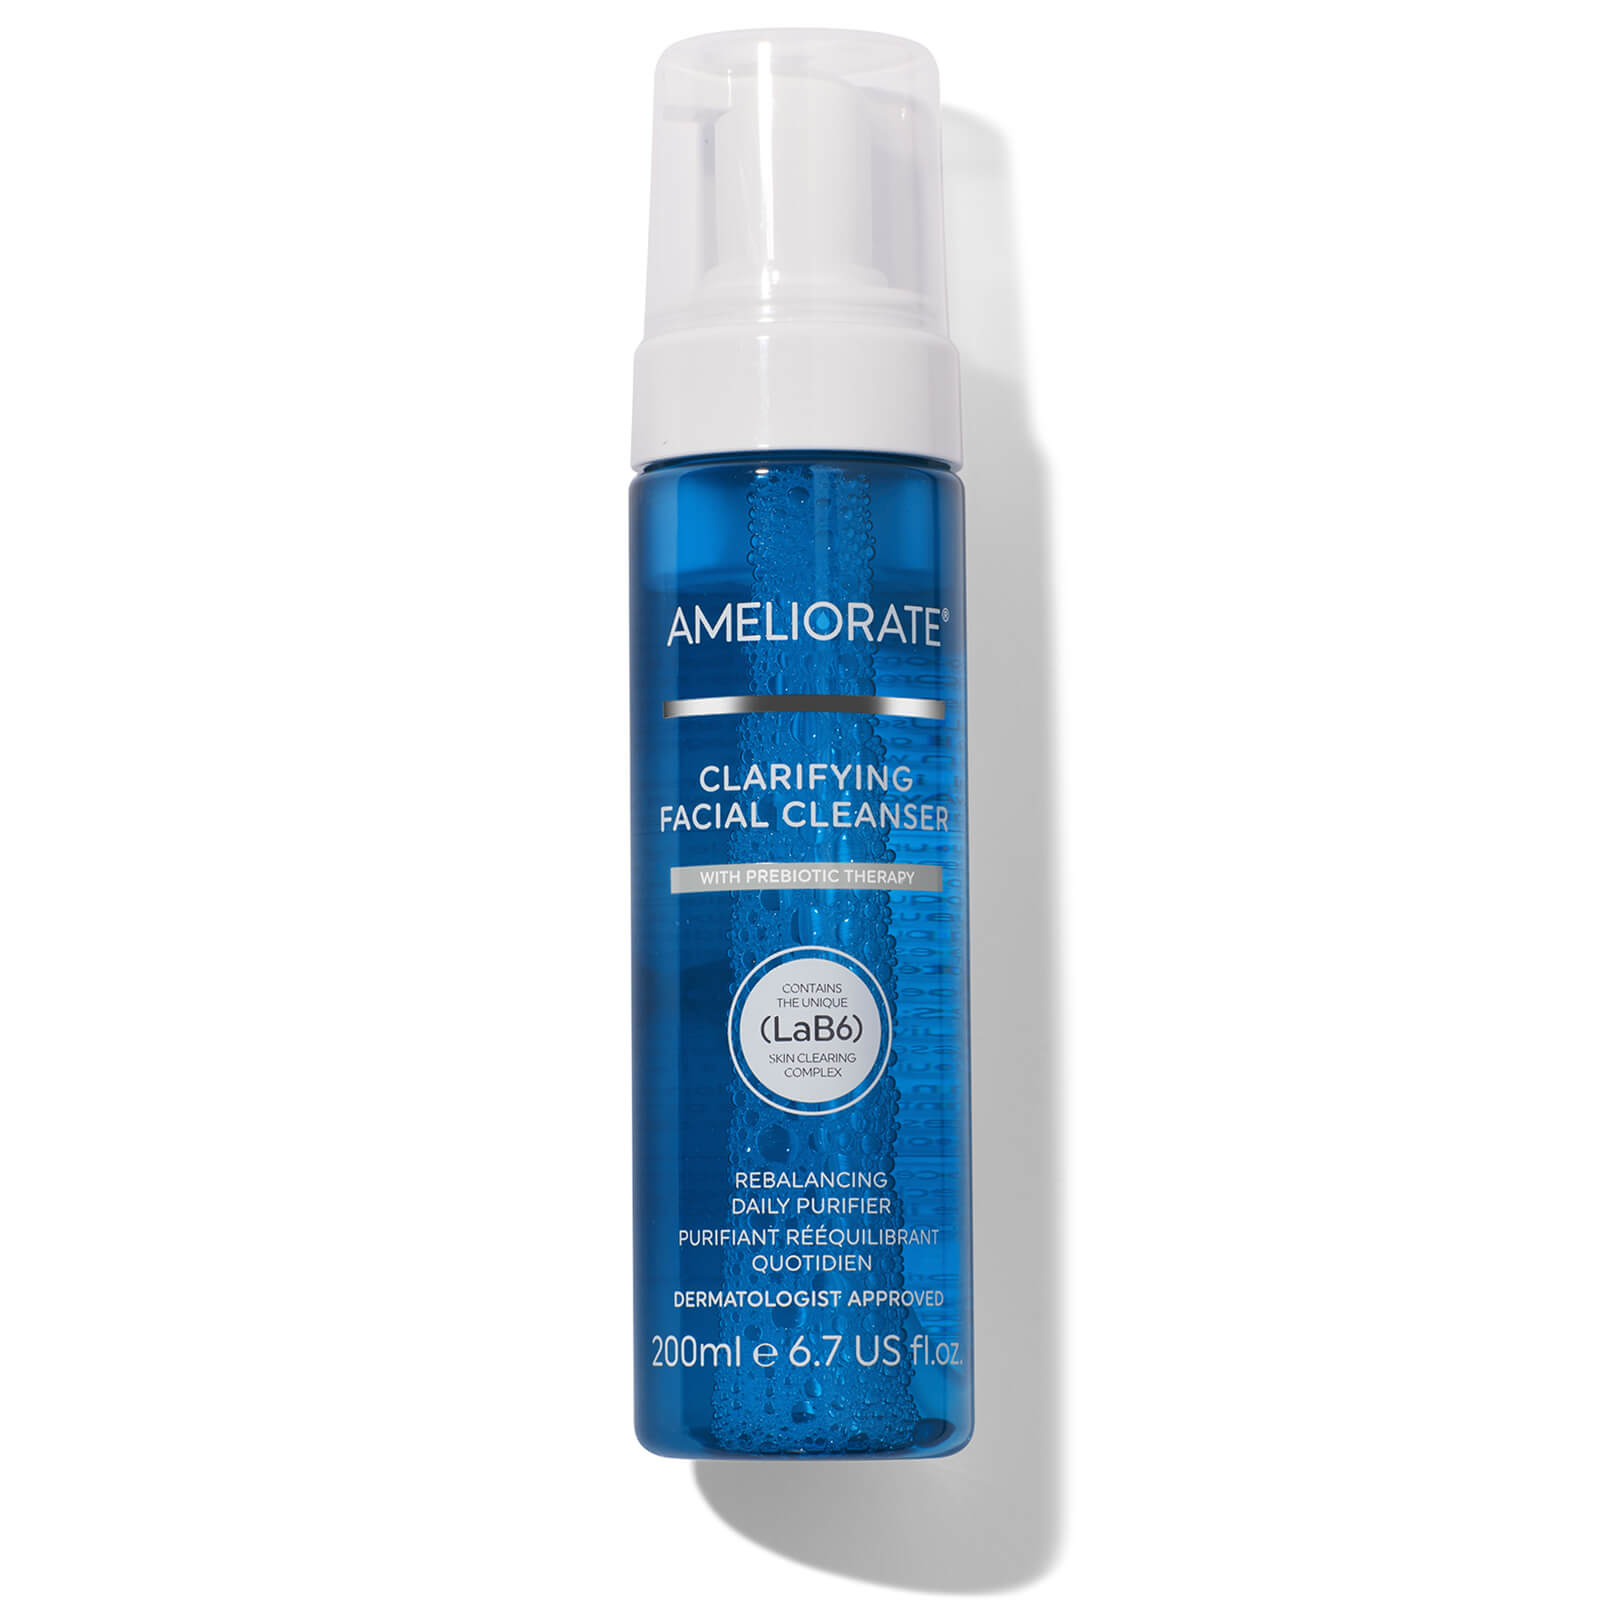 Photos - Facial / Body Cleansing Product AMELIORATE Clarifying Facial Cleanser 200ml AMELIORATE20252